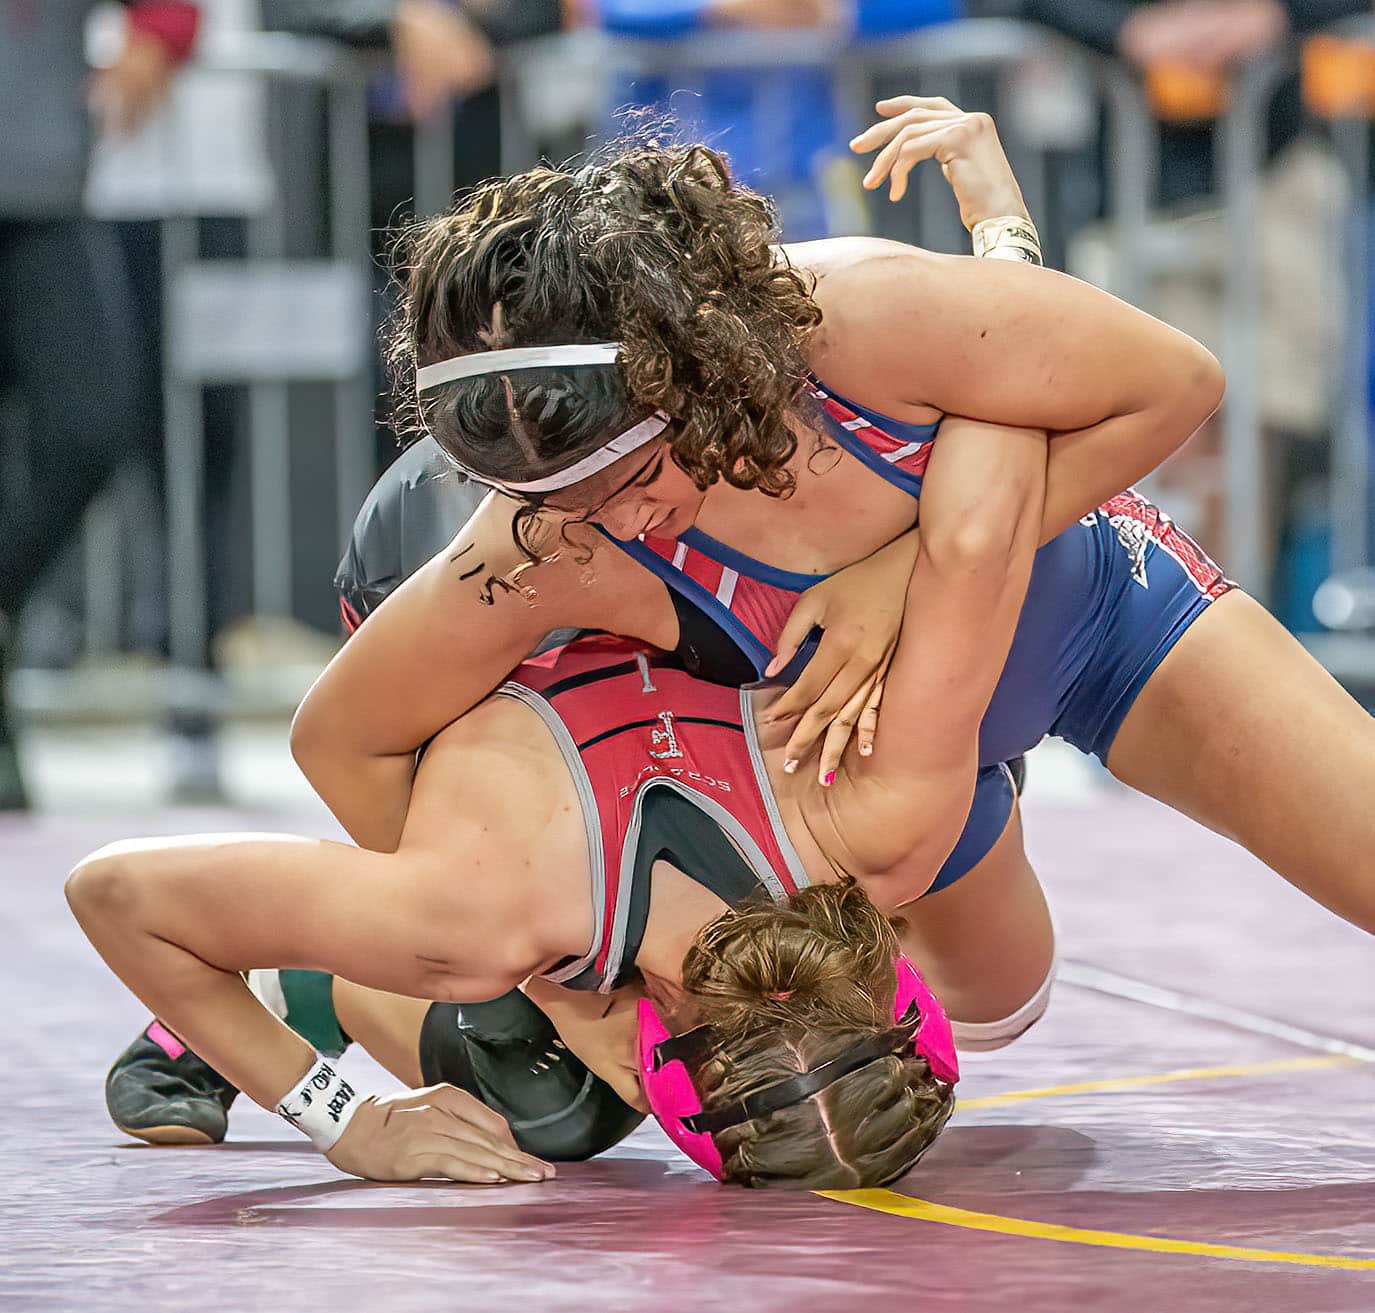 Springstead High’s 115-pound competitor, Emma Bauknight, pinned Lilyana Gargano of Five High to earn a 7th-place finish at the FHSAA IBT Championships in Kissimmee. Photo by JOE DiCRISTOFALO